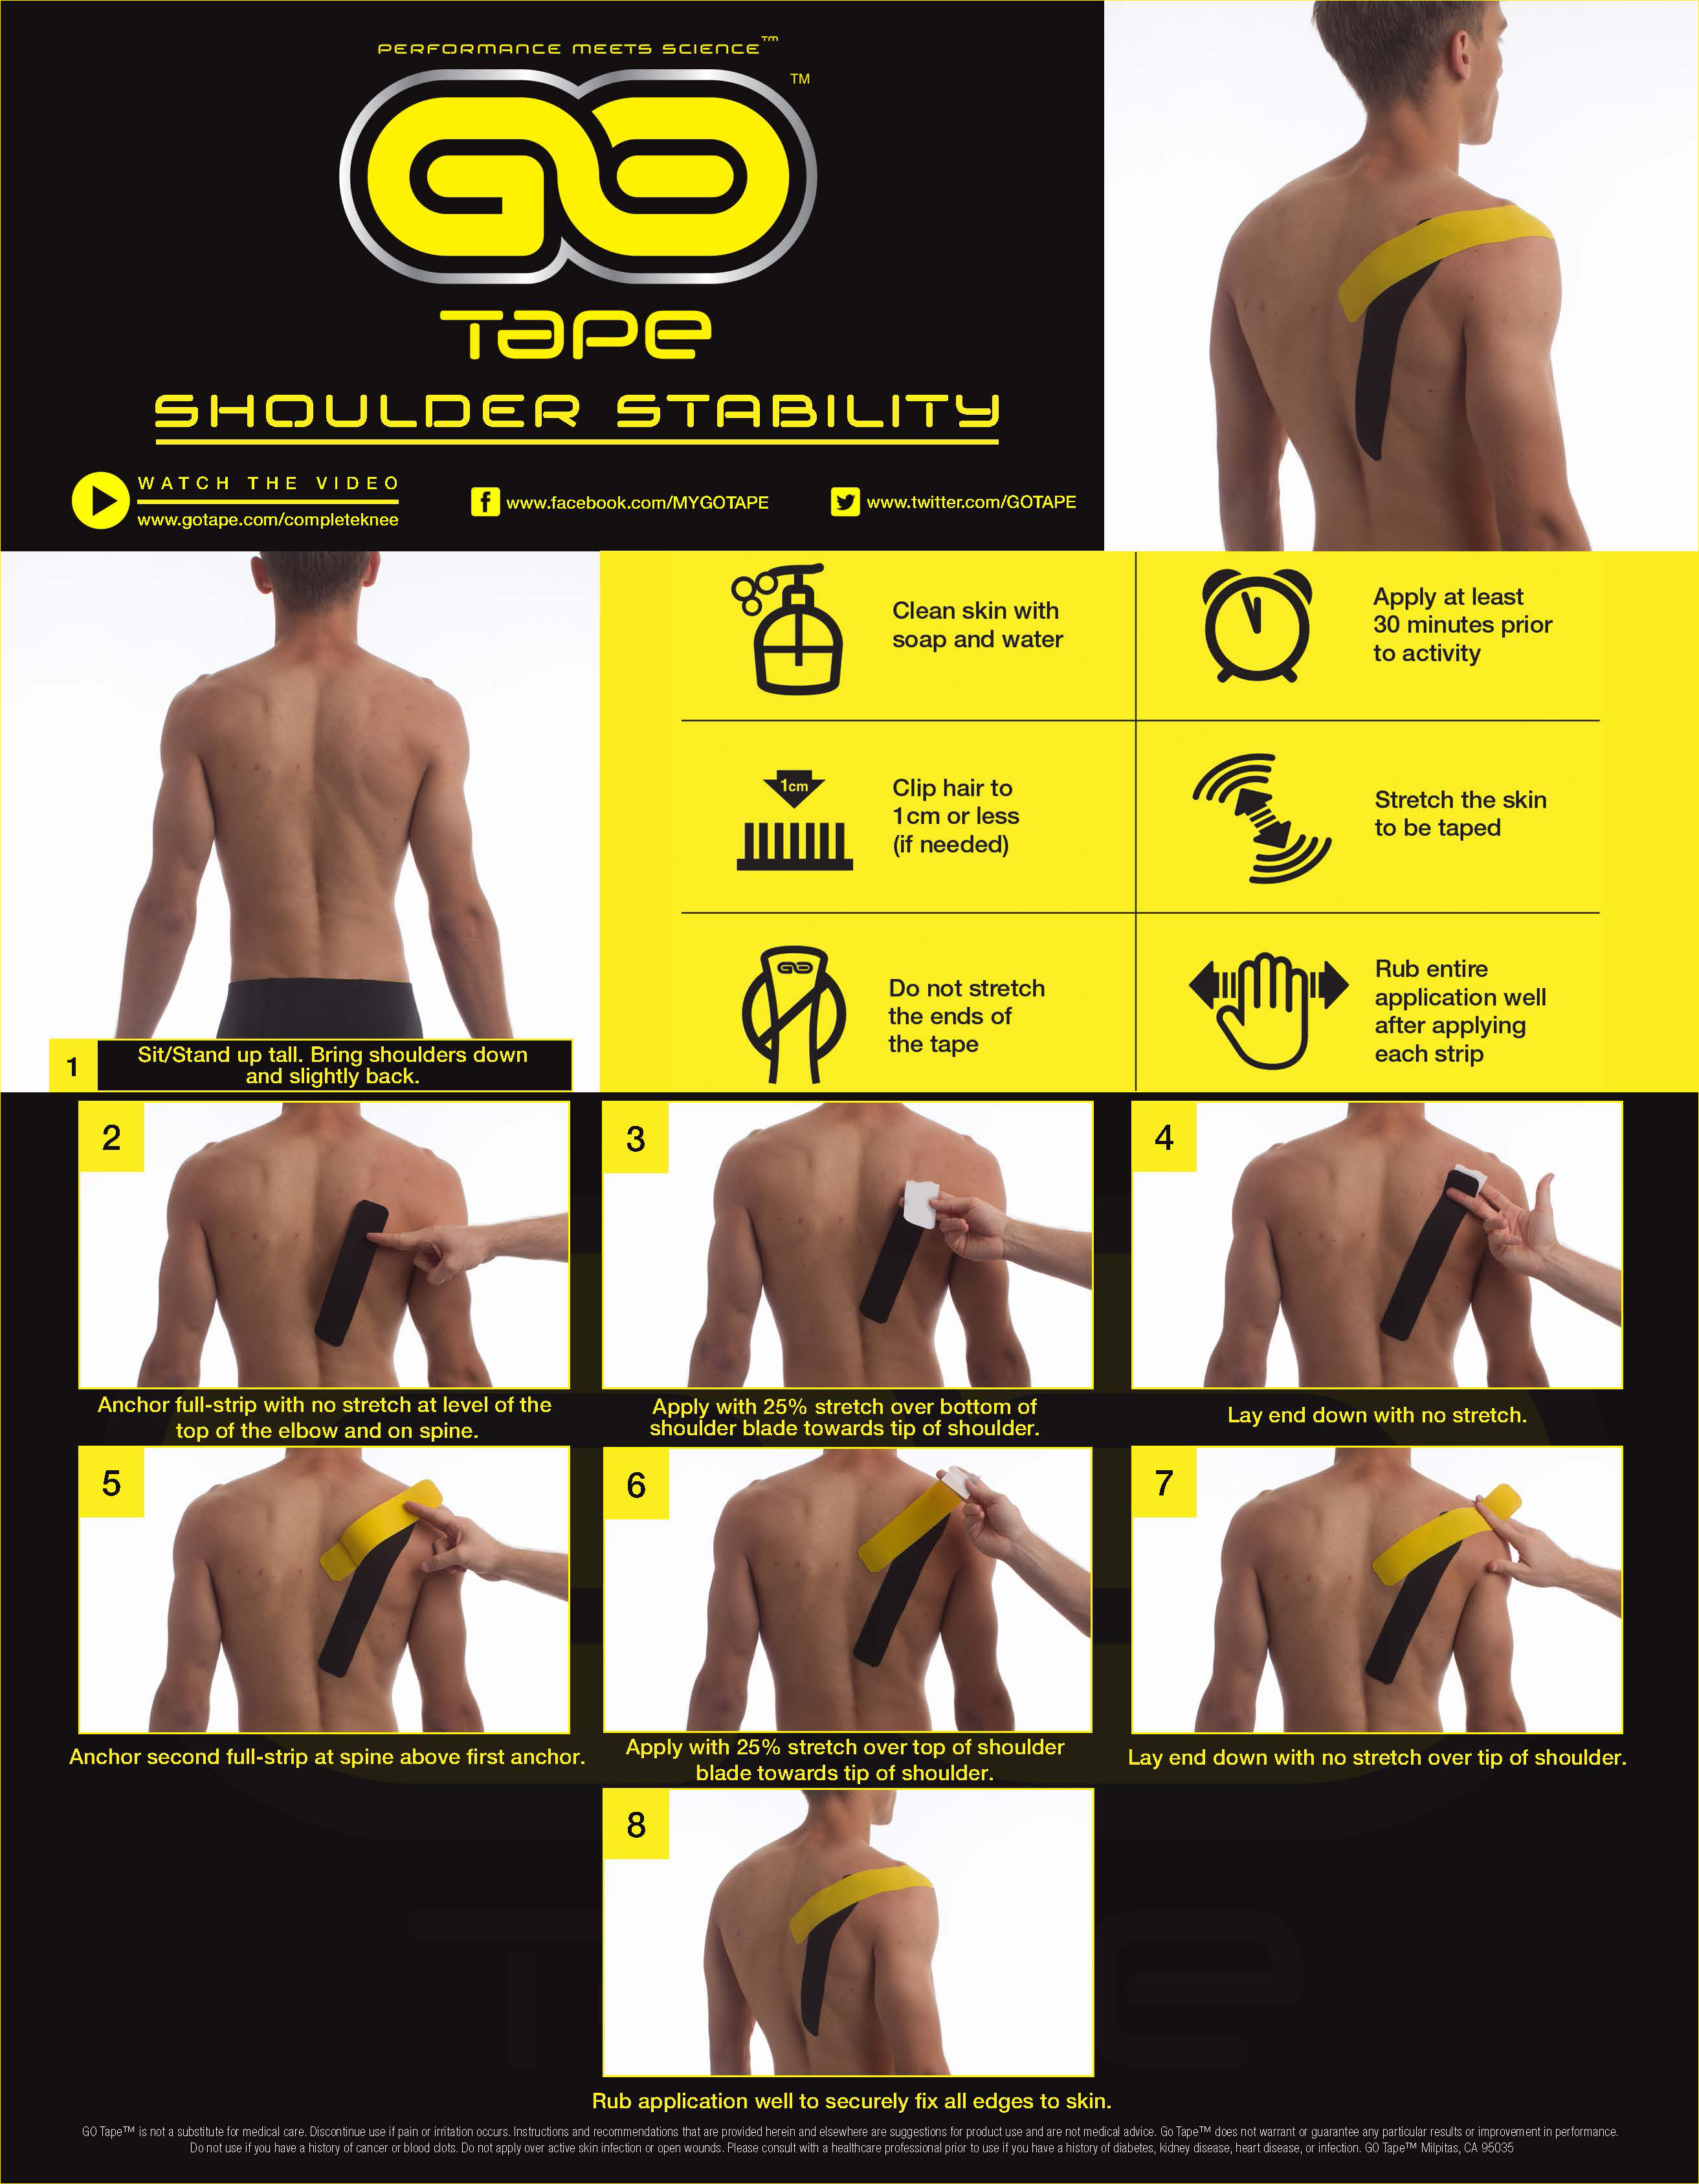 GO_Tape_Application_Instructions_Shoulder_Stability